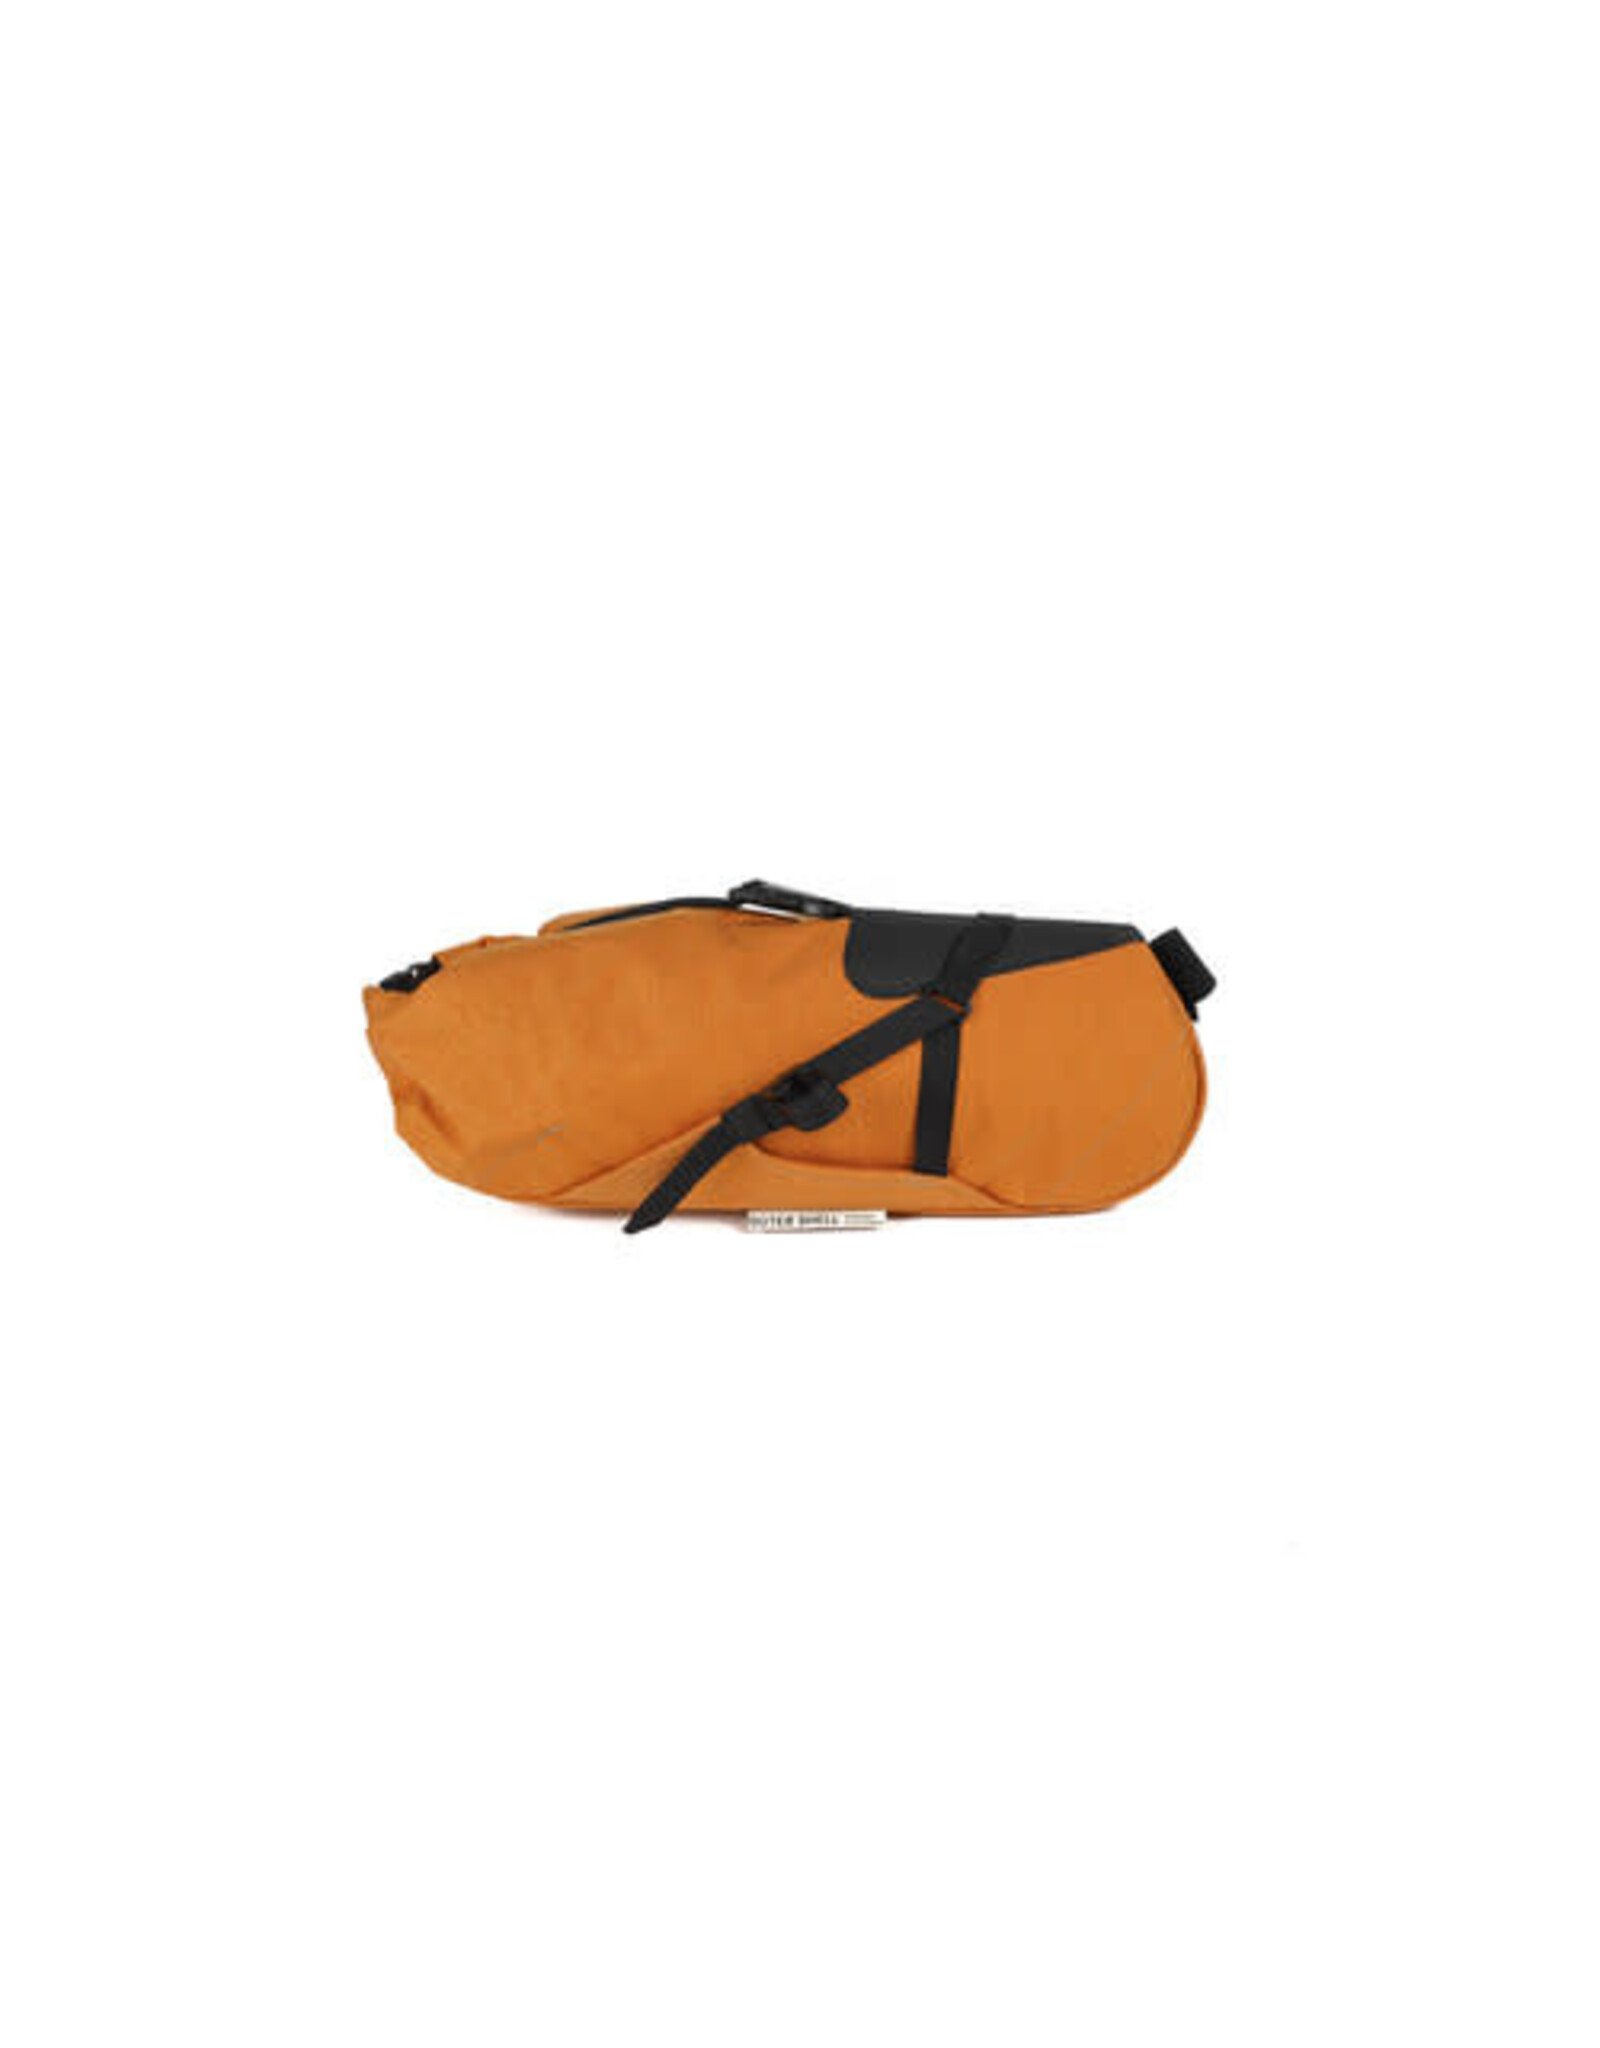 outer shell Expedition Seatpack